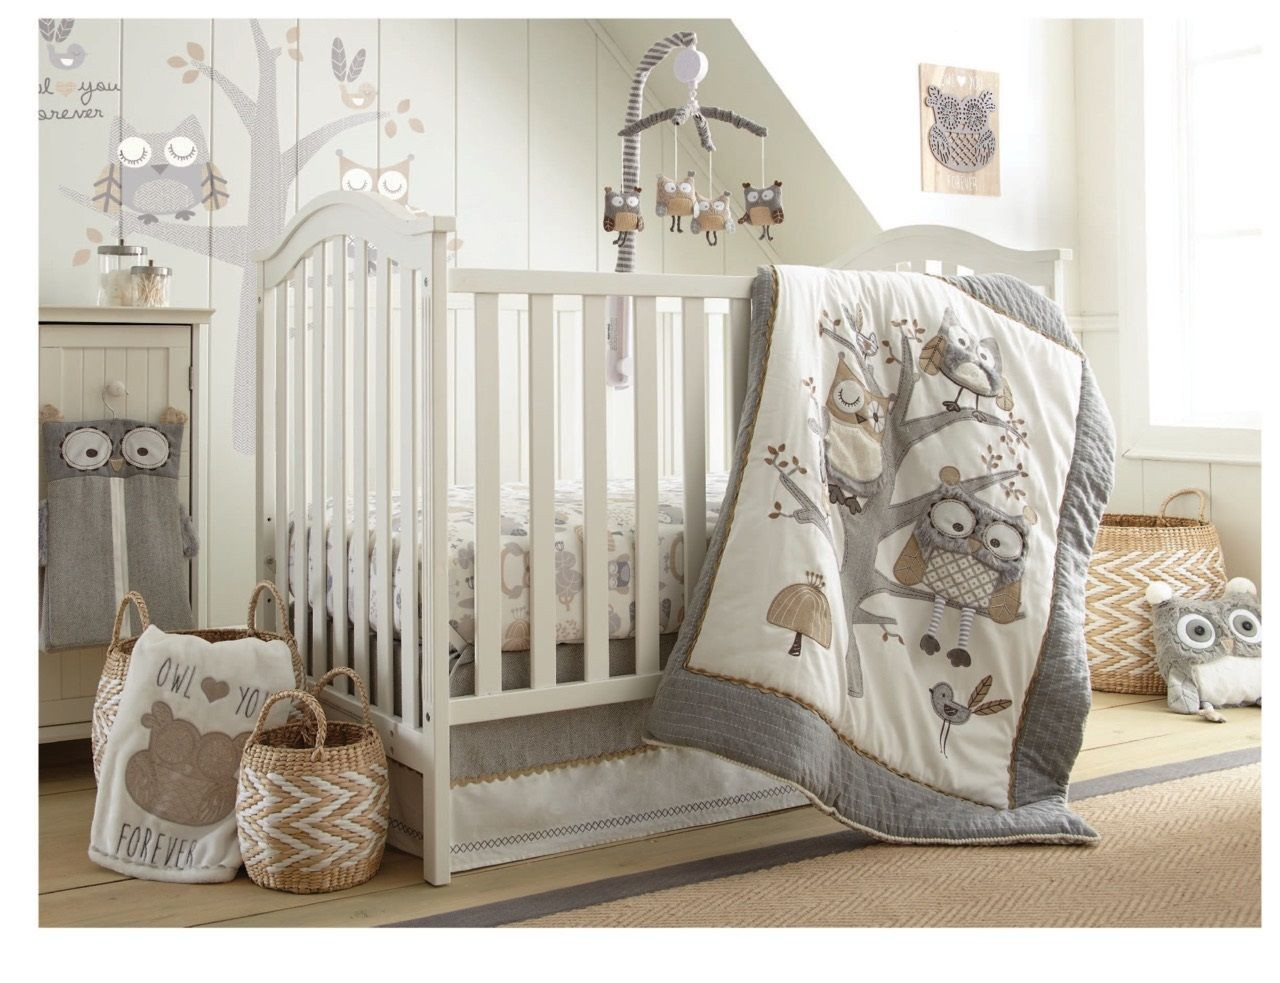 Owl Baby Decor
 The Night Owl Nursery Collection features a detailed